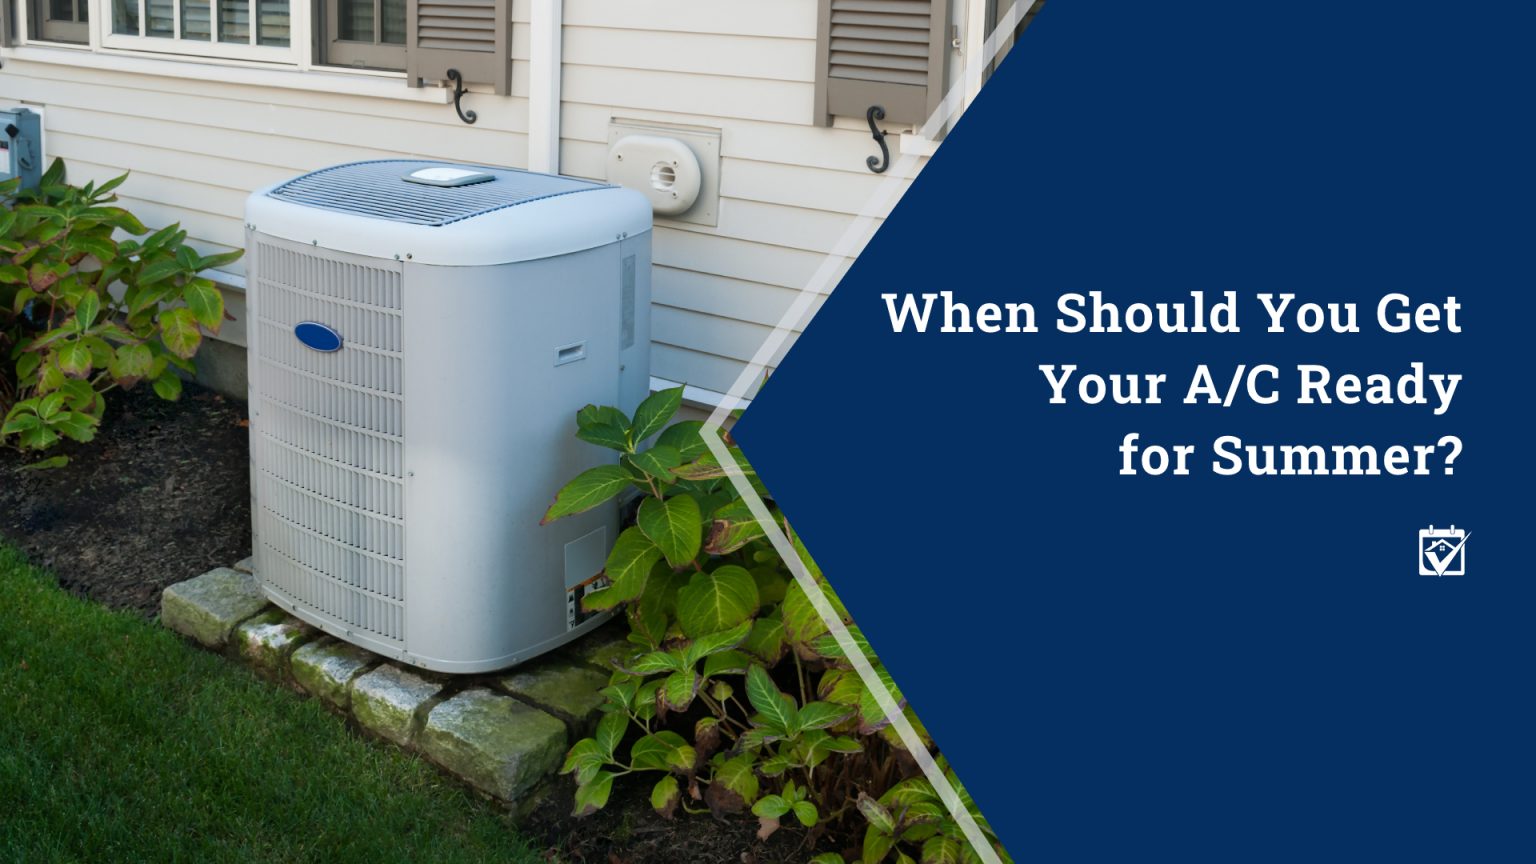 When Should You Get Your A/C Ready for Summer?